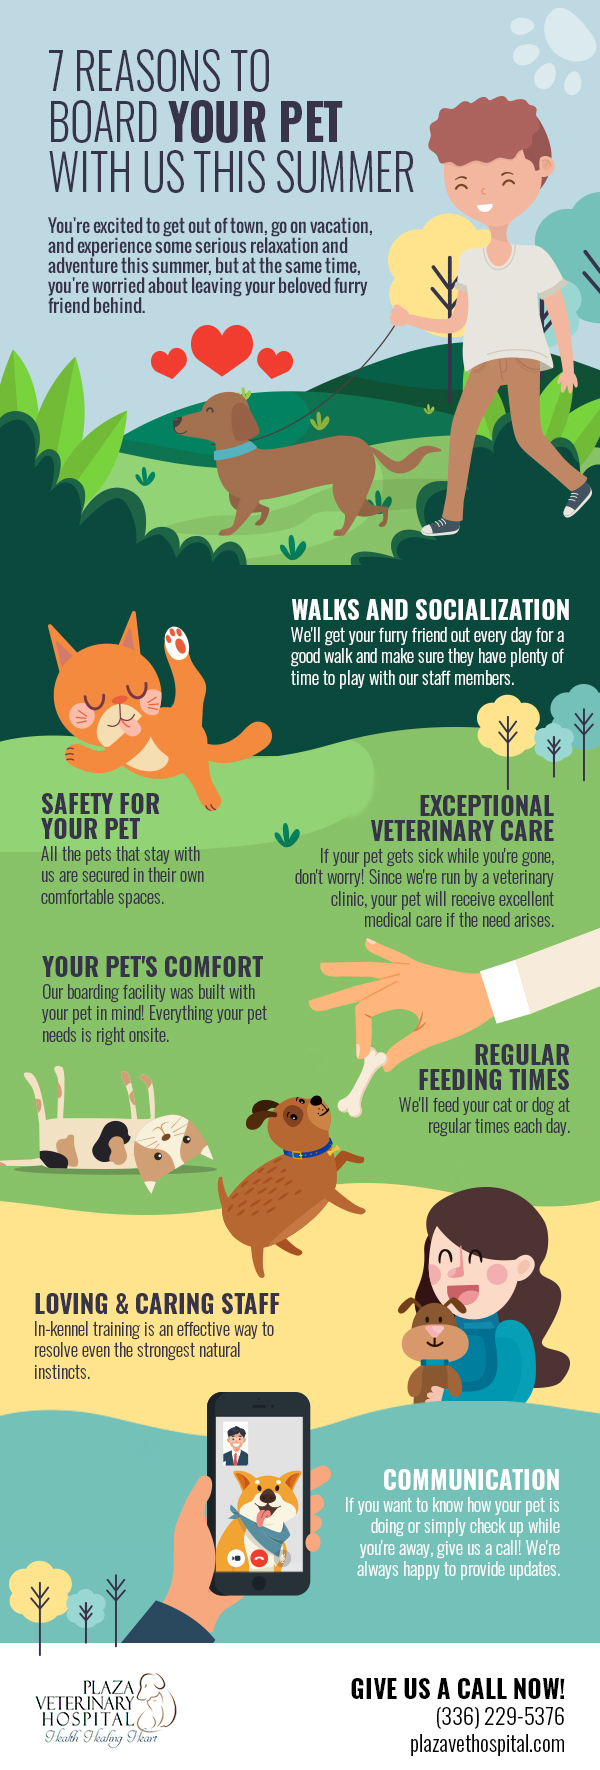 7 Reasons to Board Your Pet with Us This Summer [infographic]